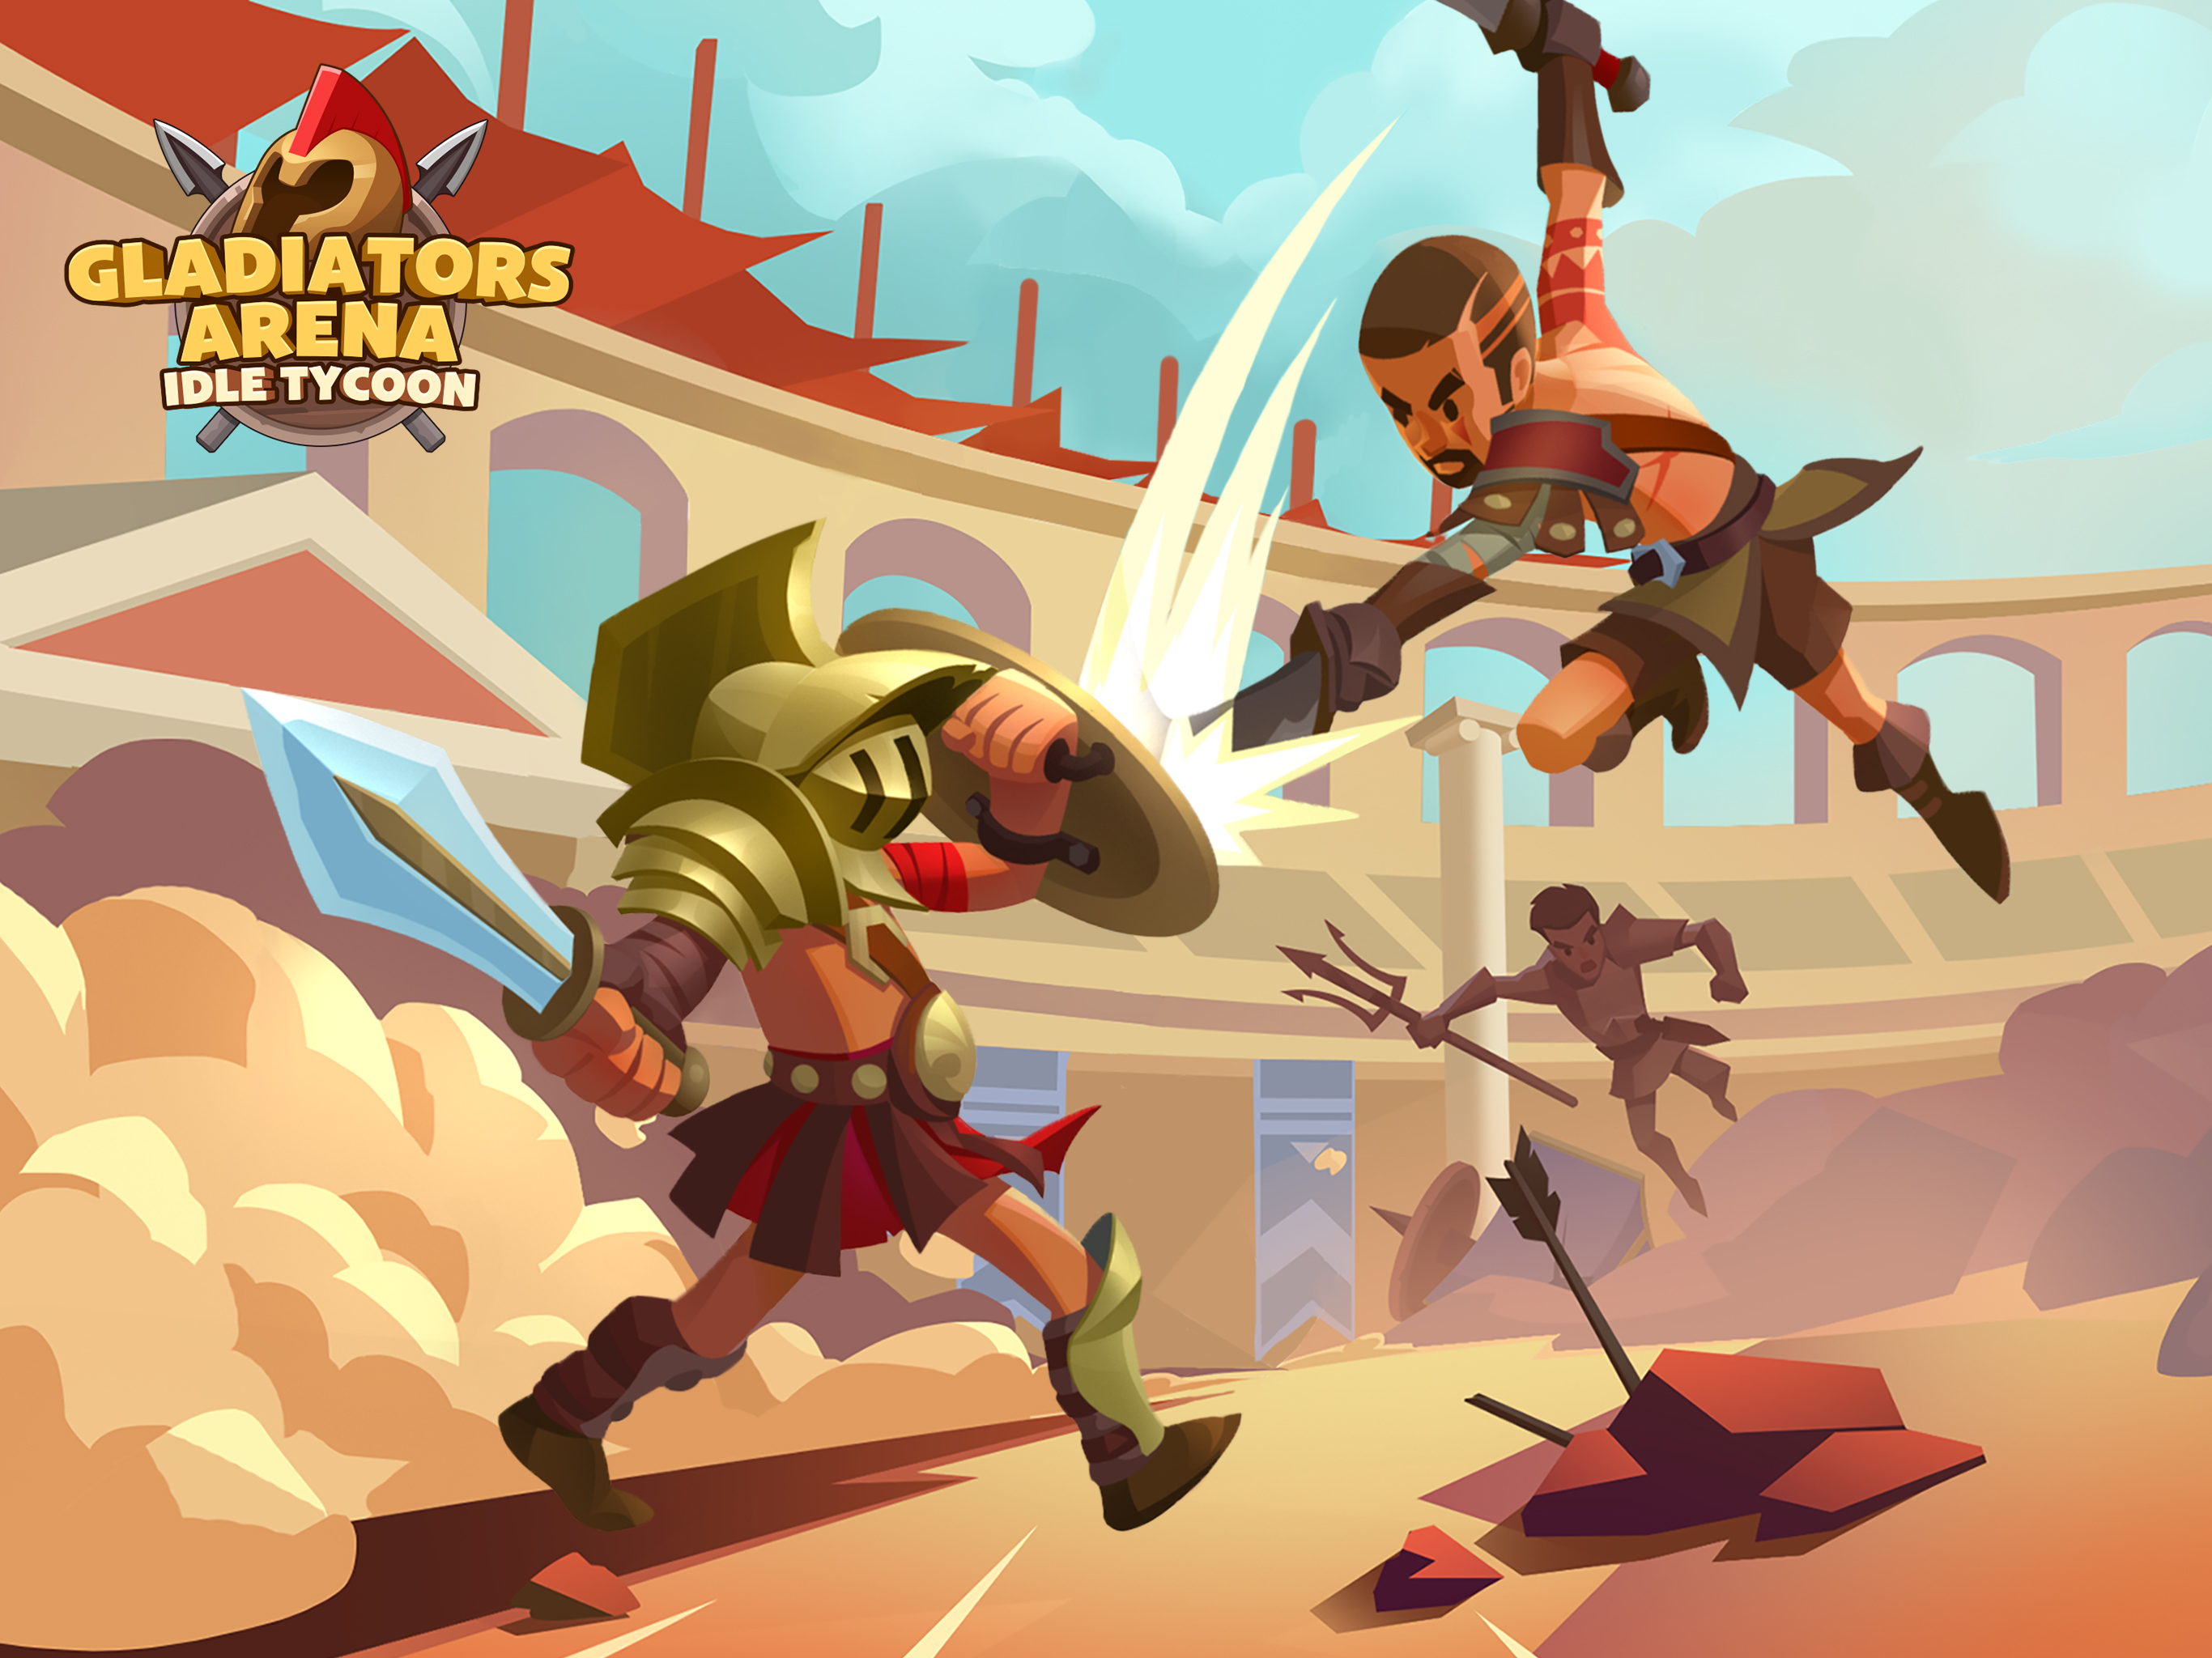 Gladiator Heroes Clash Kingdom for Android - Free App Download